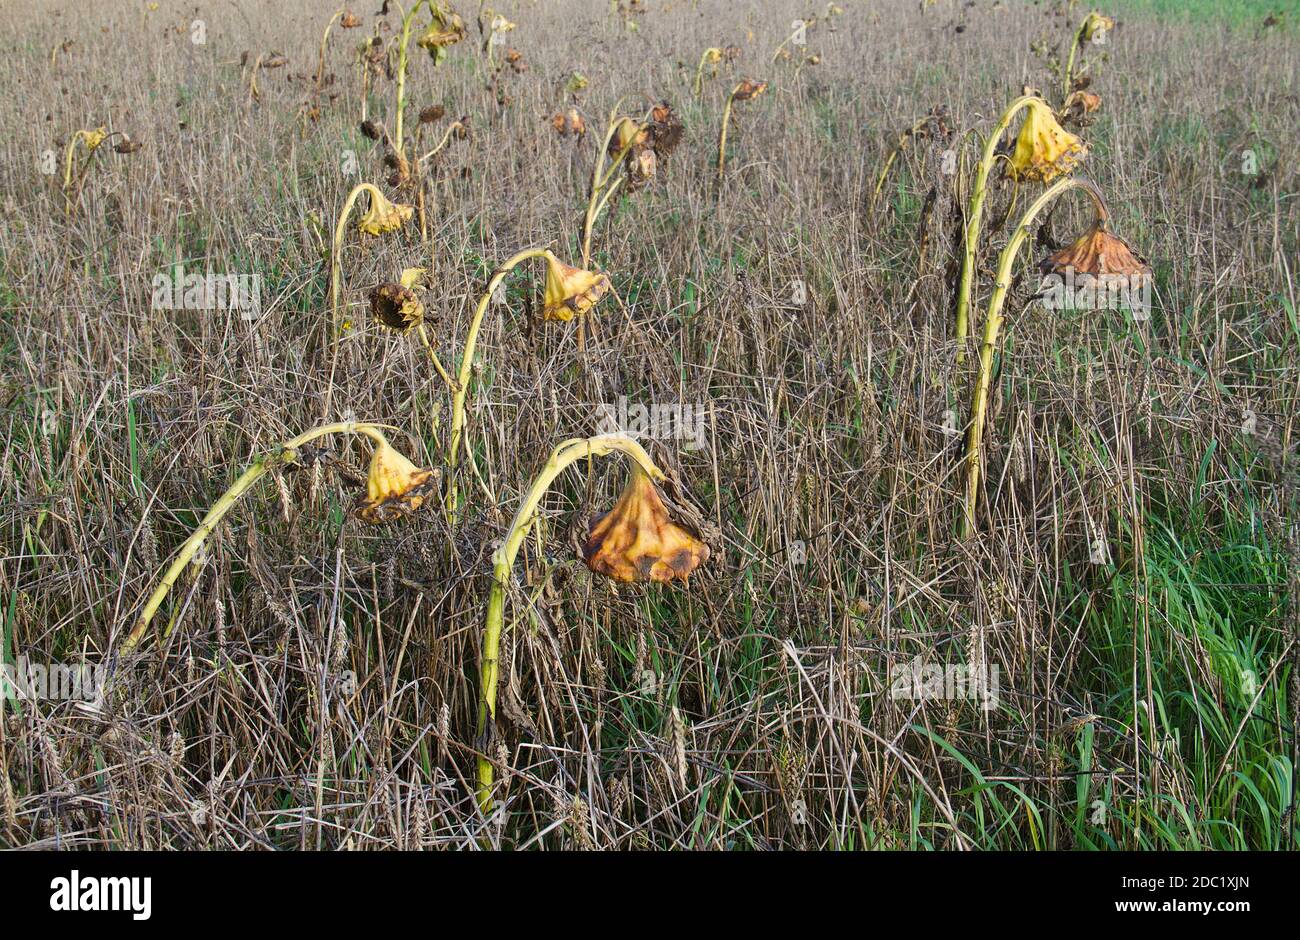 Wheatfield with withered Sunflowers in autumn Stock Photo